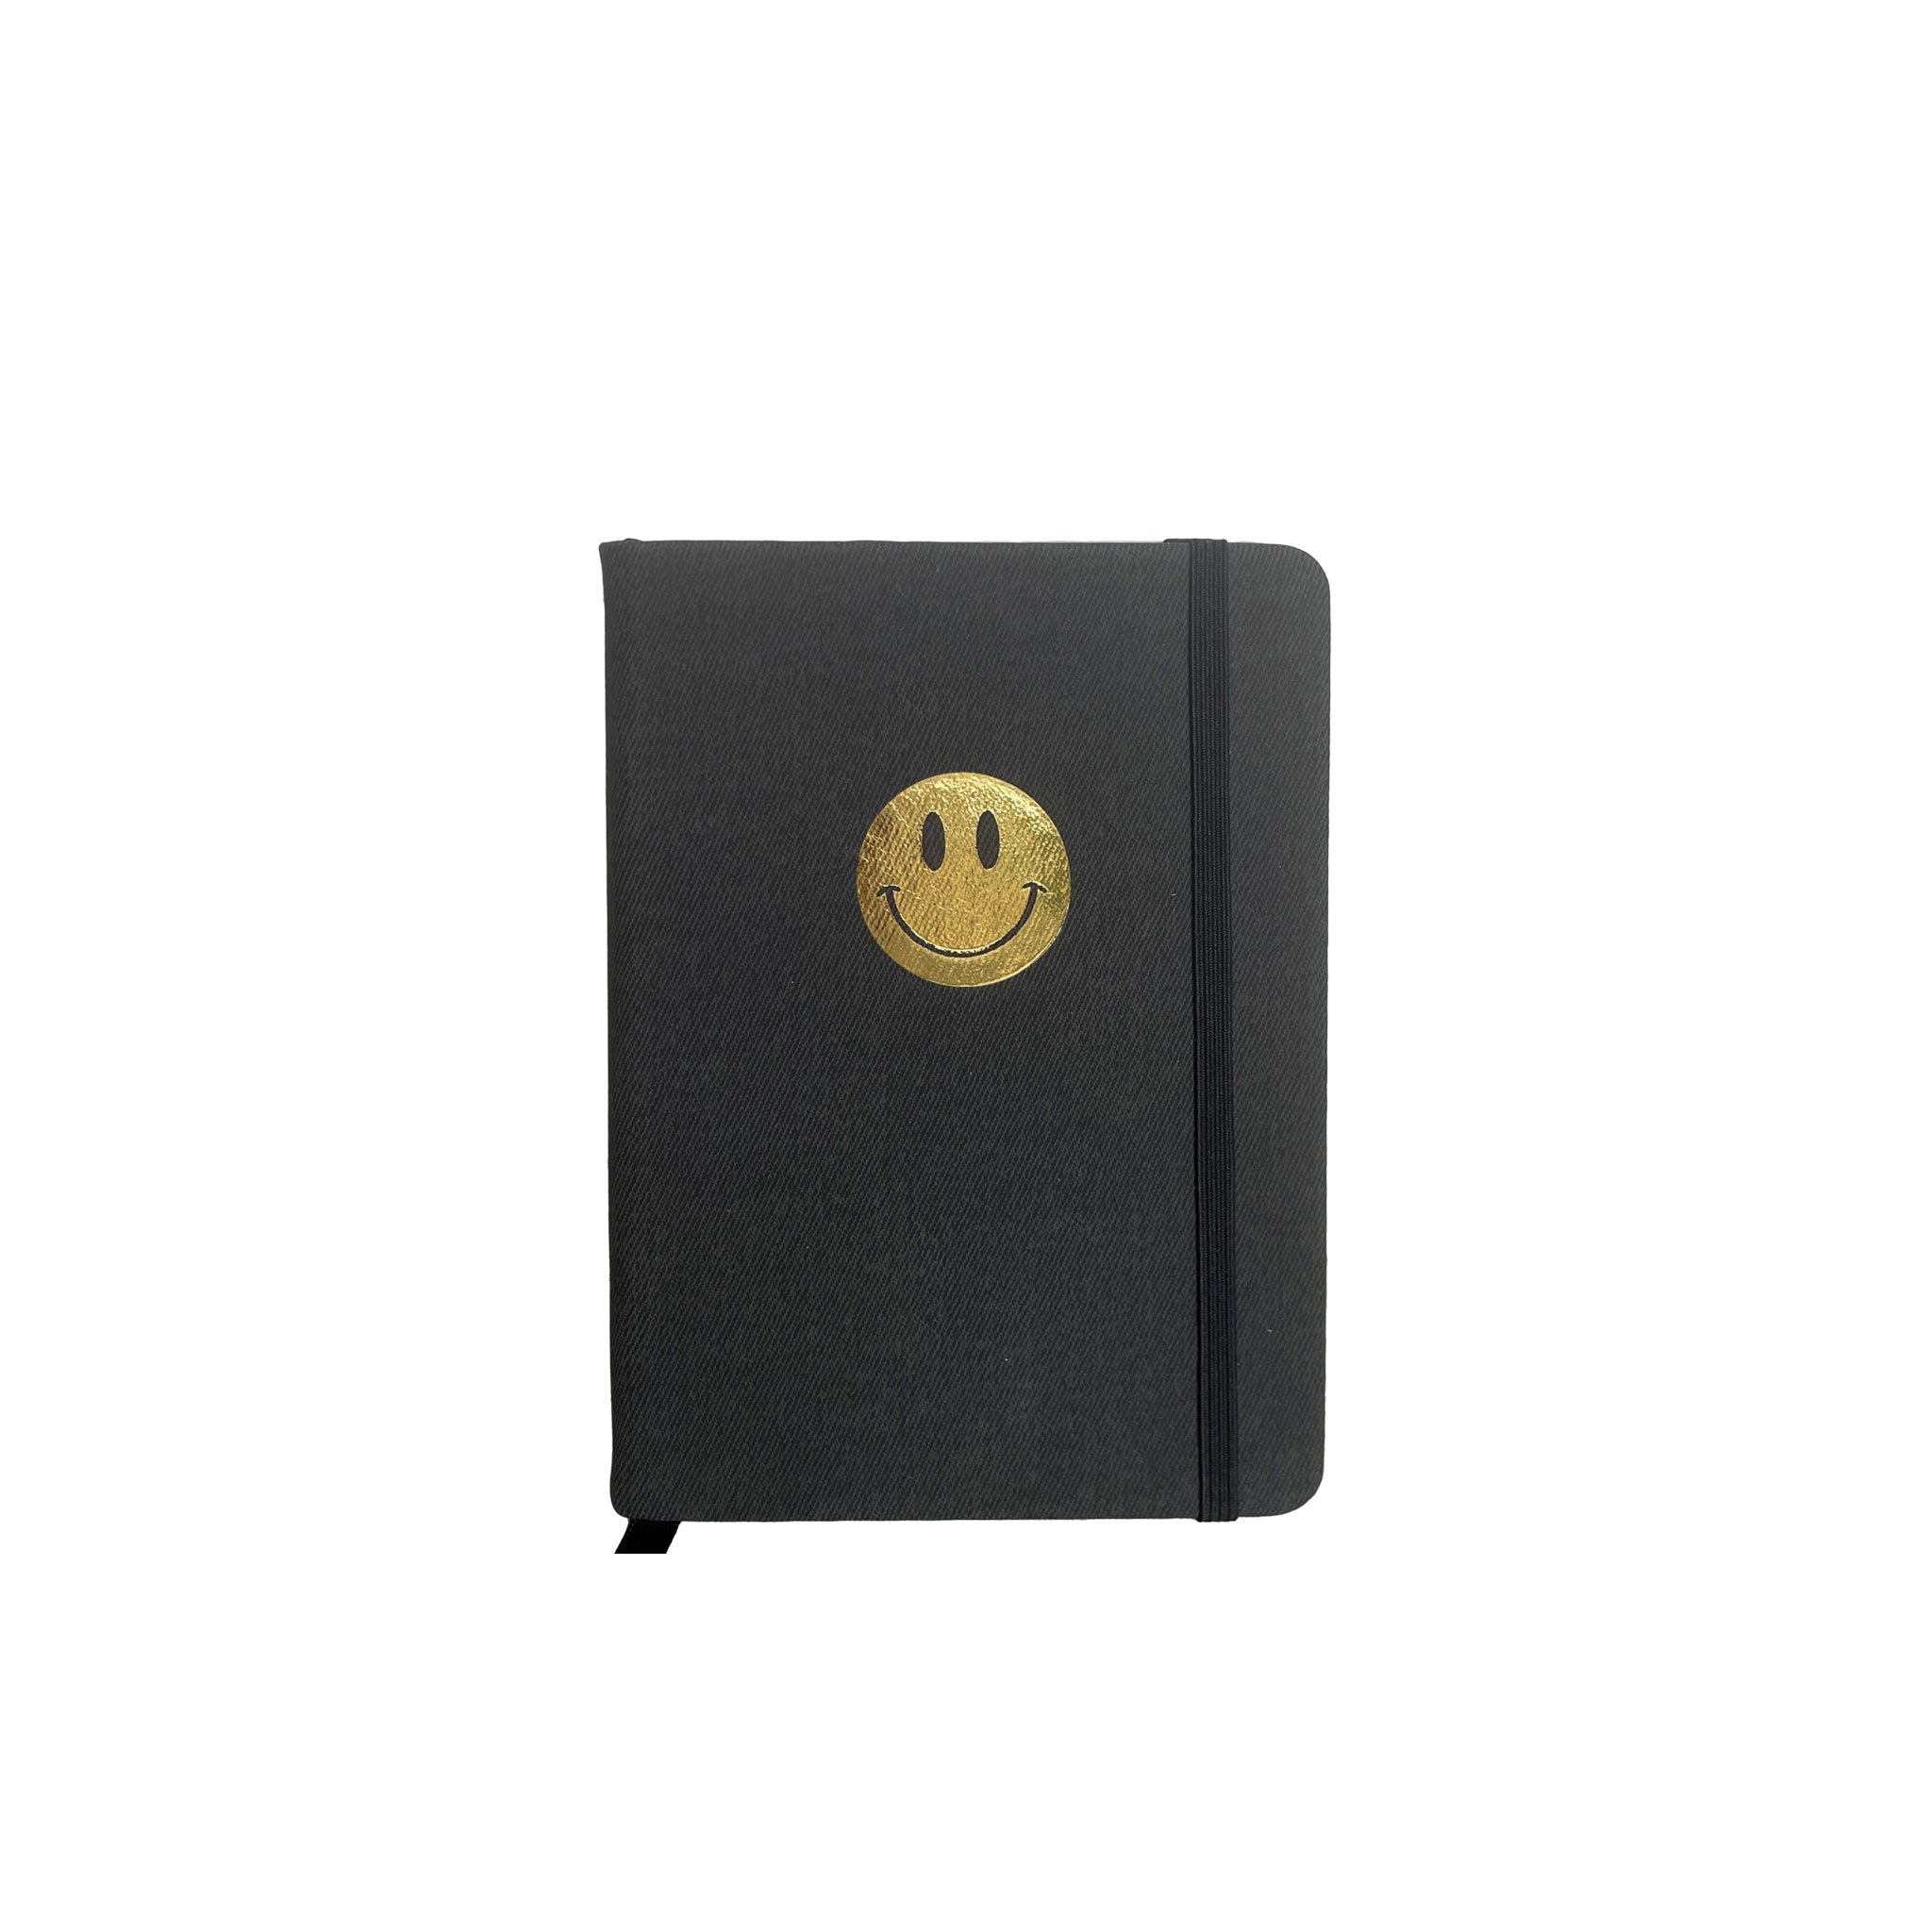 Notebook "Smiley" | A6 | Anthracite/gold